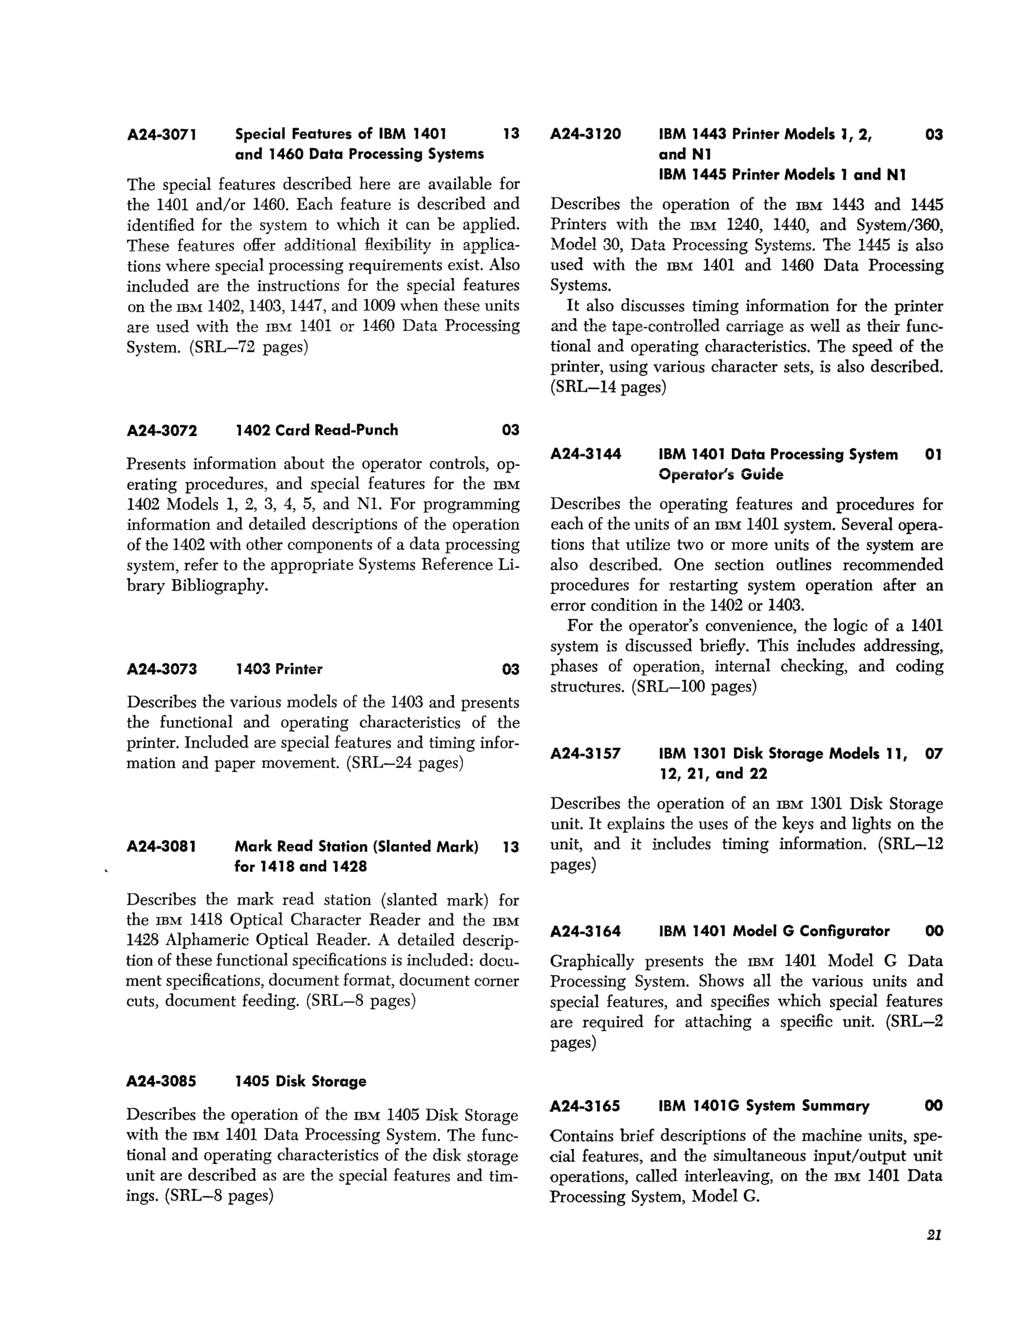 A24-3071 Special Features of IBM 1401 13 and 1460 Data Processing Systems The special features described here are available for the 1401 and/or 1460.